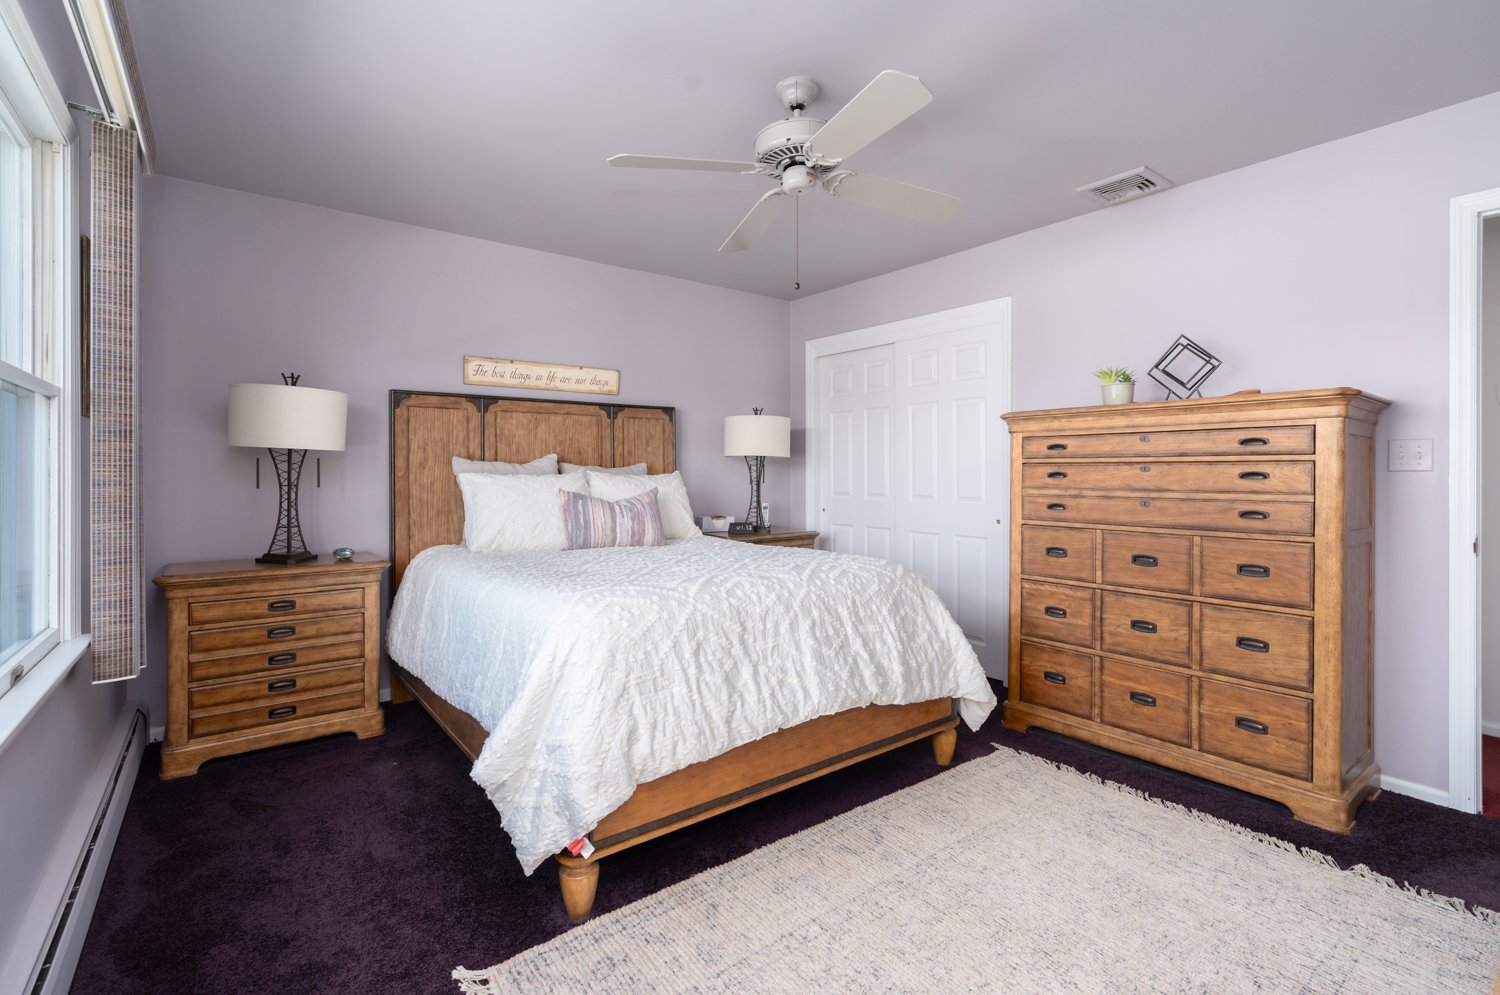 PRIMARY BED 162 Washington real estate (Low res)-7.jpg